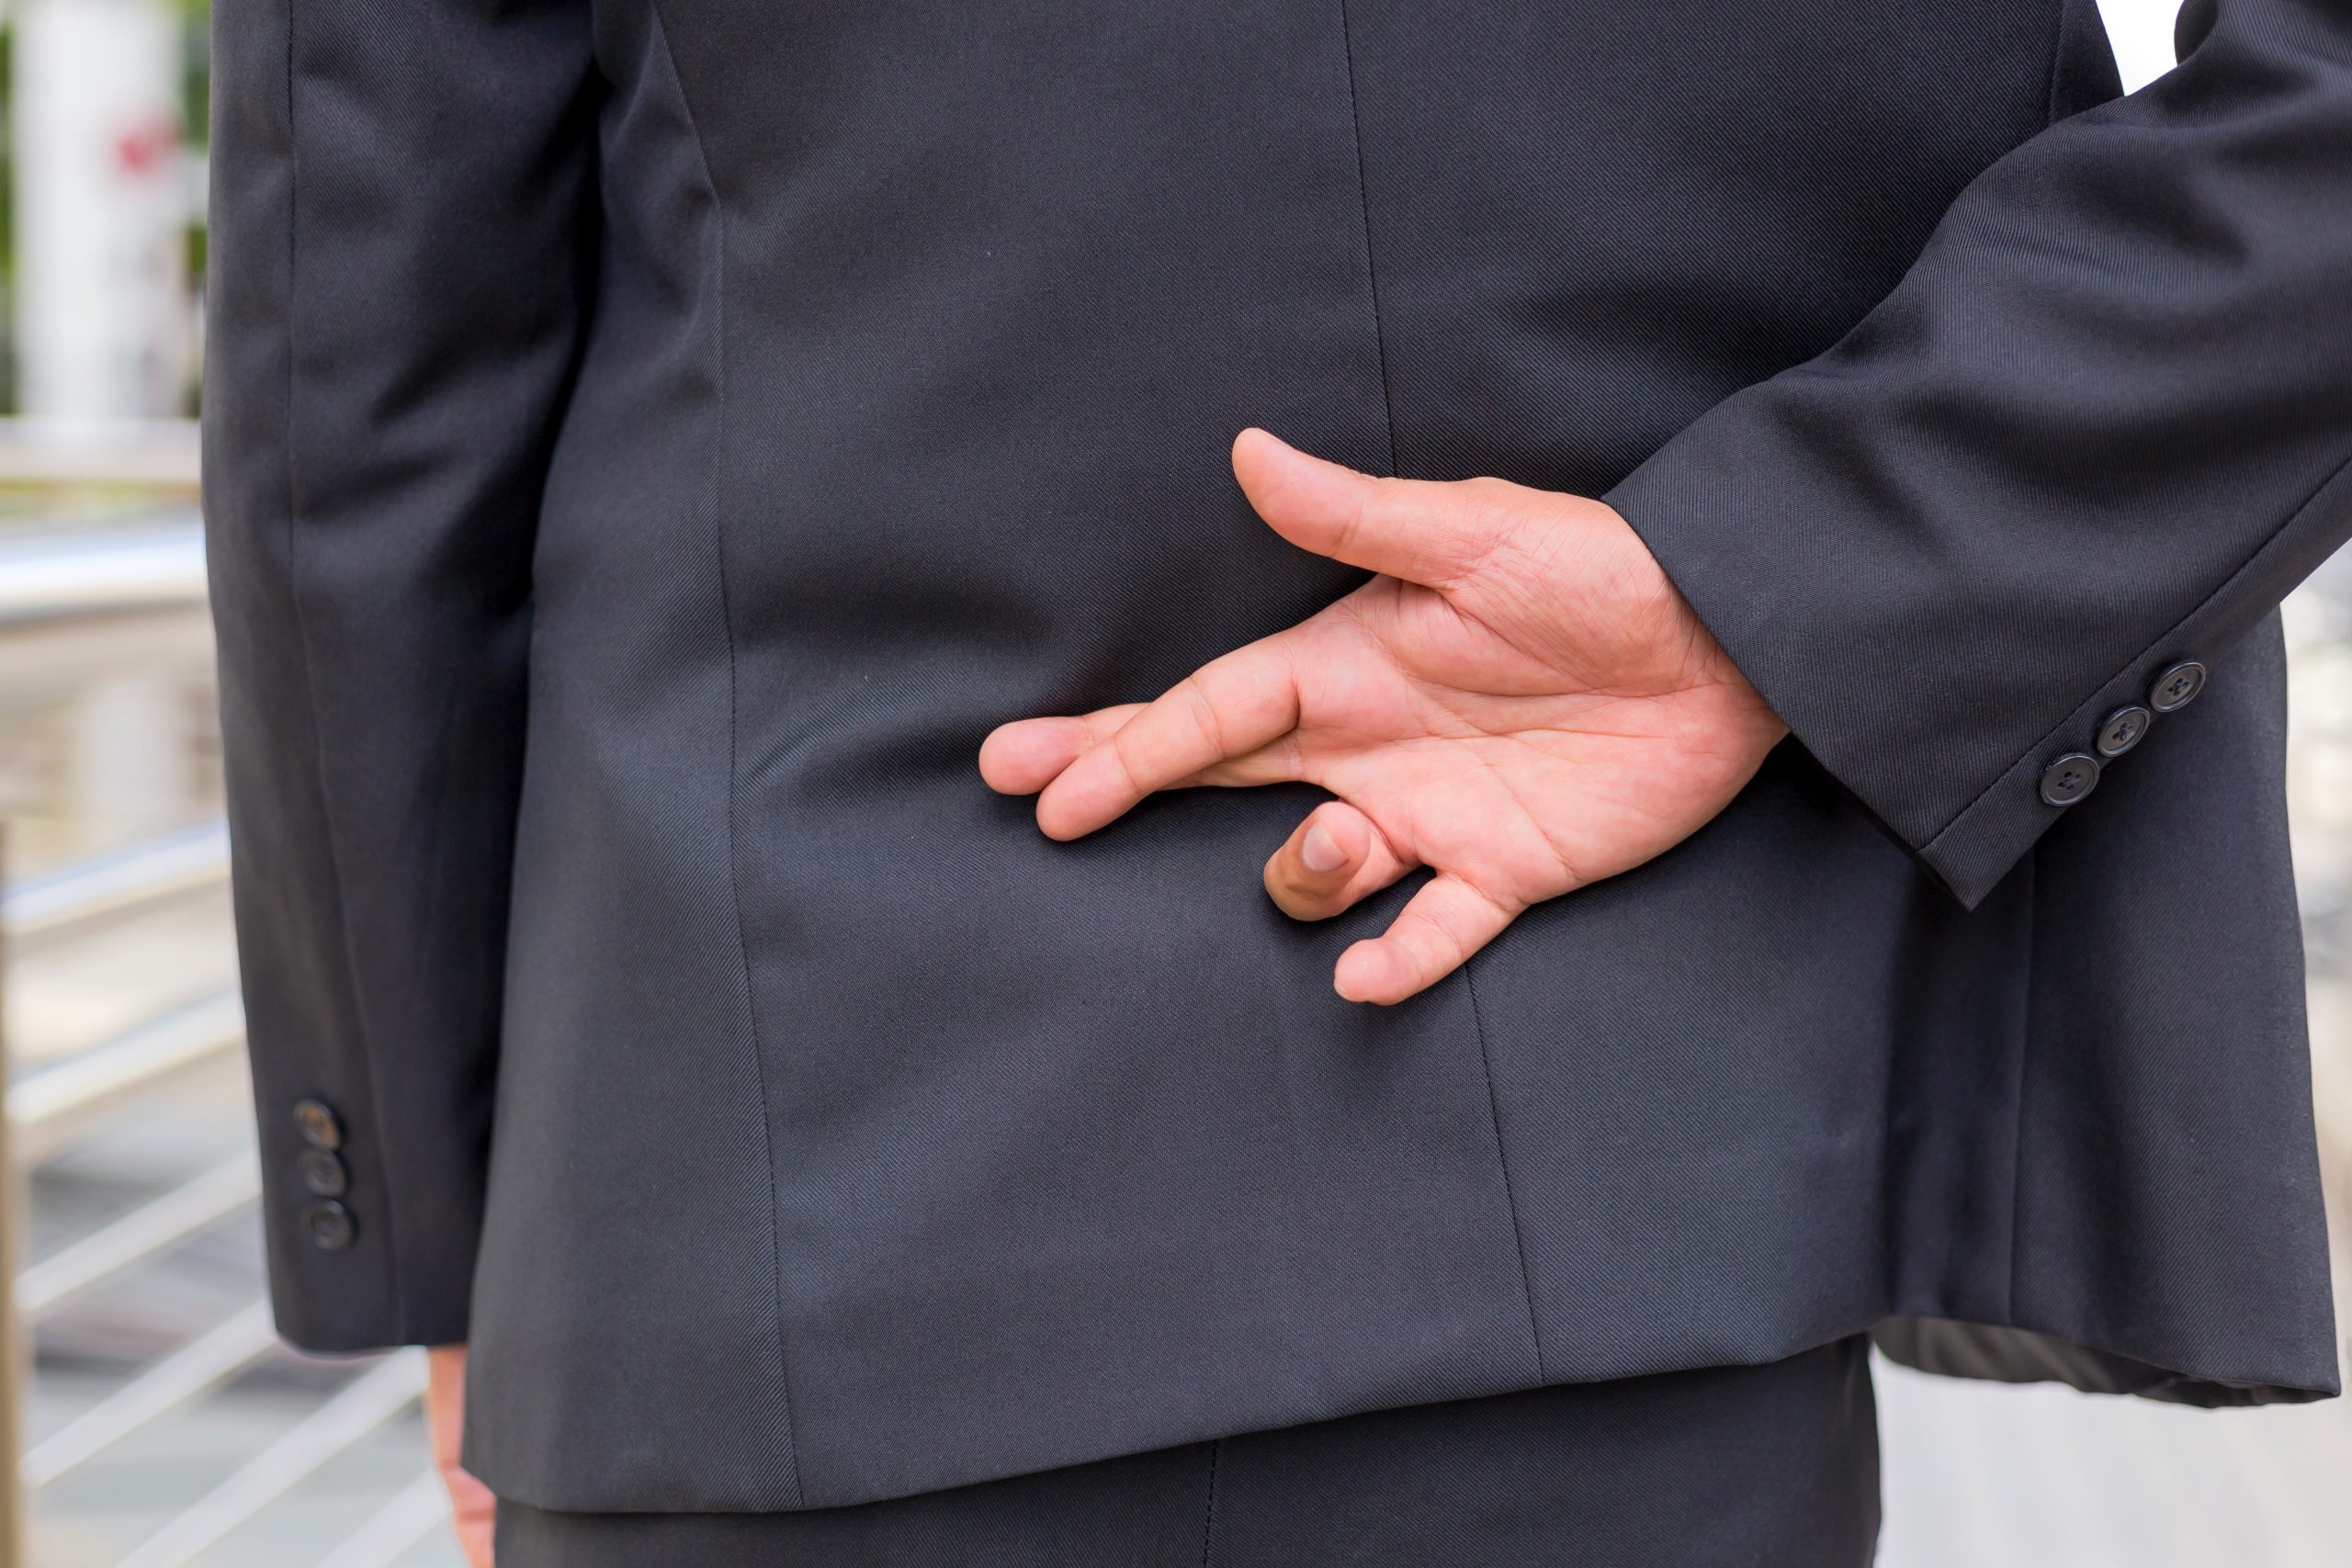 A person in a suit with their hand behind their back and their fingers crossed. Image licensed through Adobe Stock.